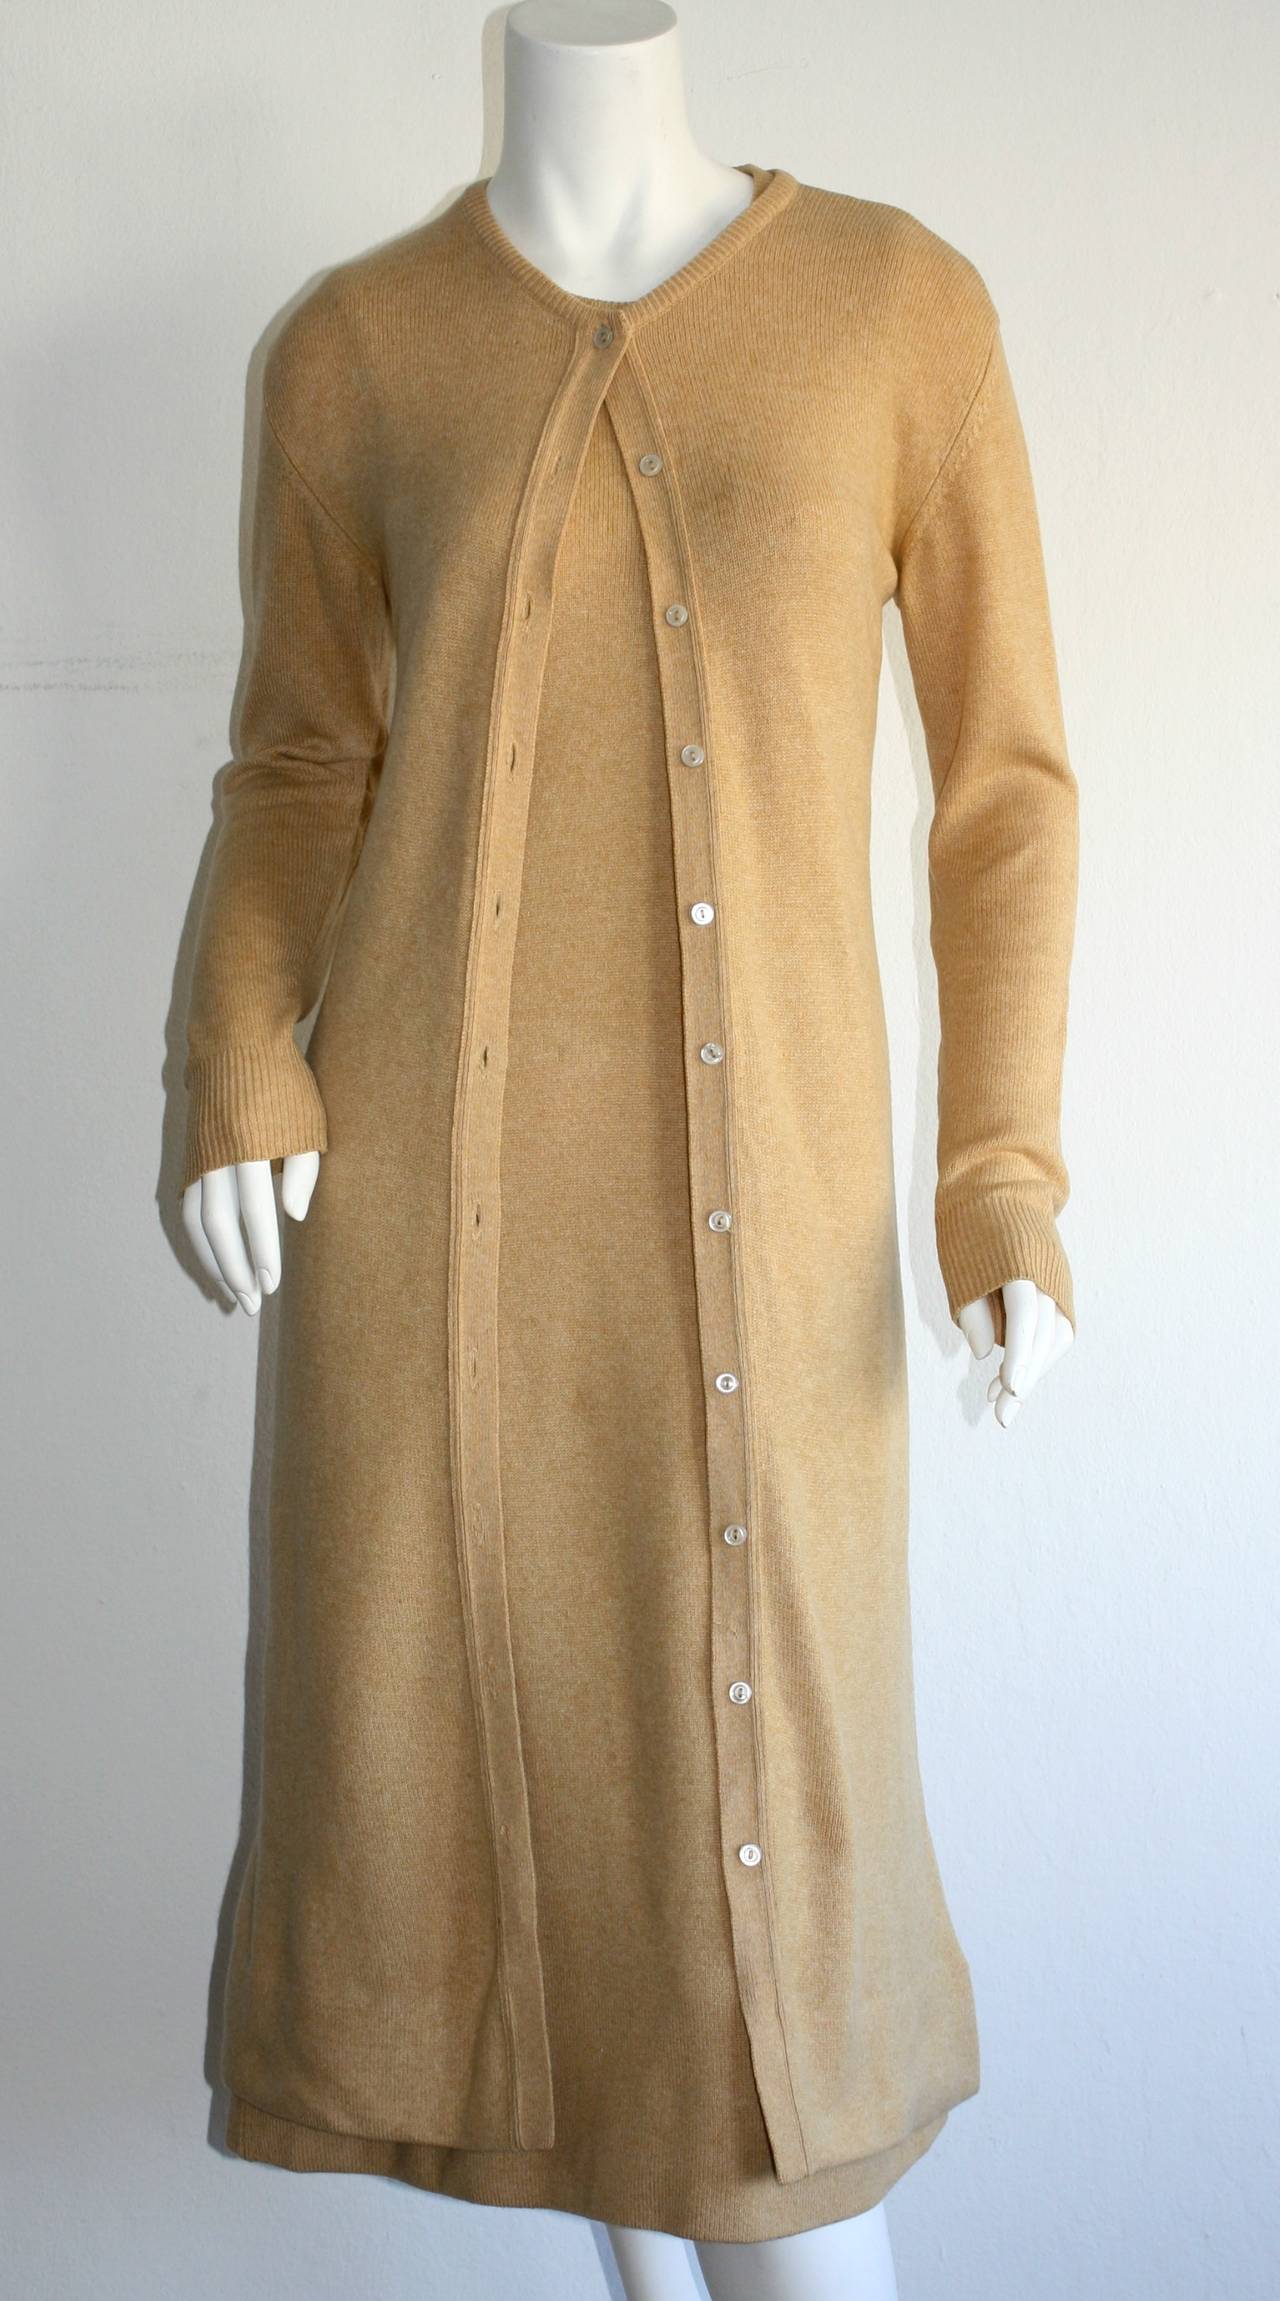 Classic vintage Halston cashmere dress and cardigan ensemble! Beautiful camel color, that is extremely versatile. This cashmere ensemble is so soft, one would be so lucky to sleep in it! Perfect as separates, but equally impressive together.